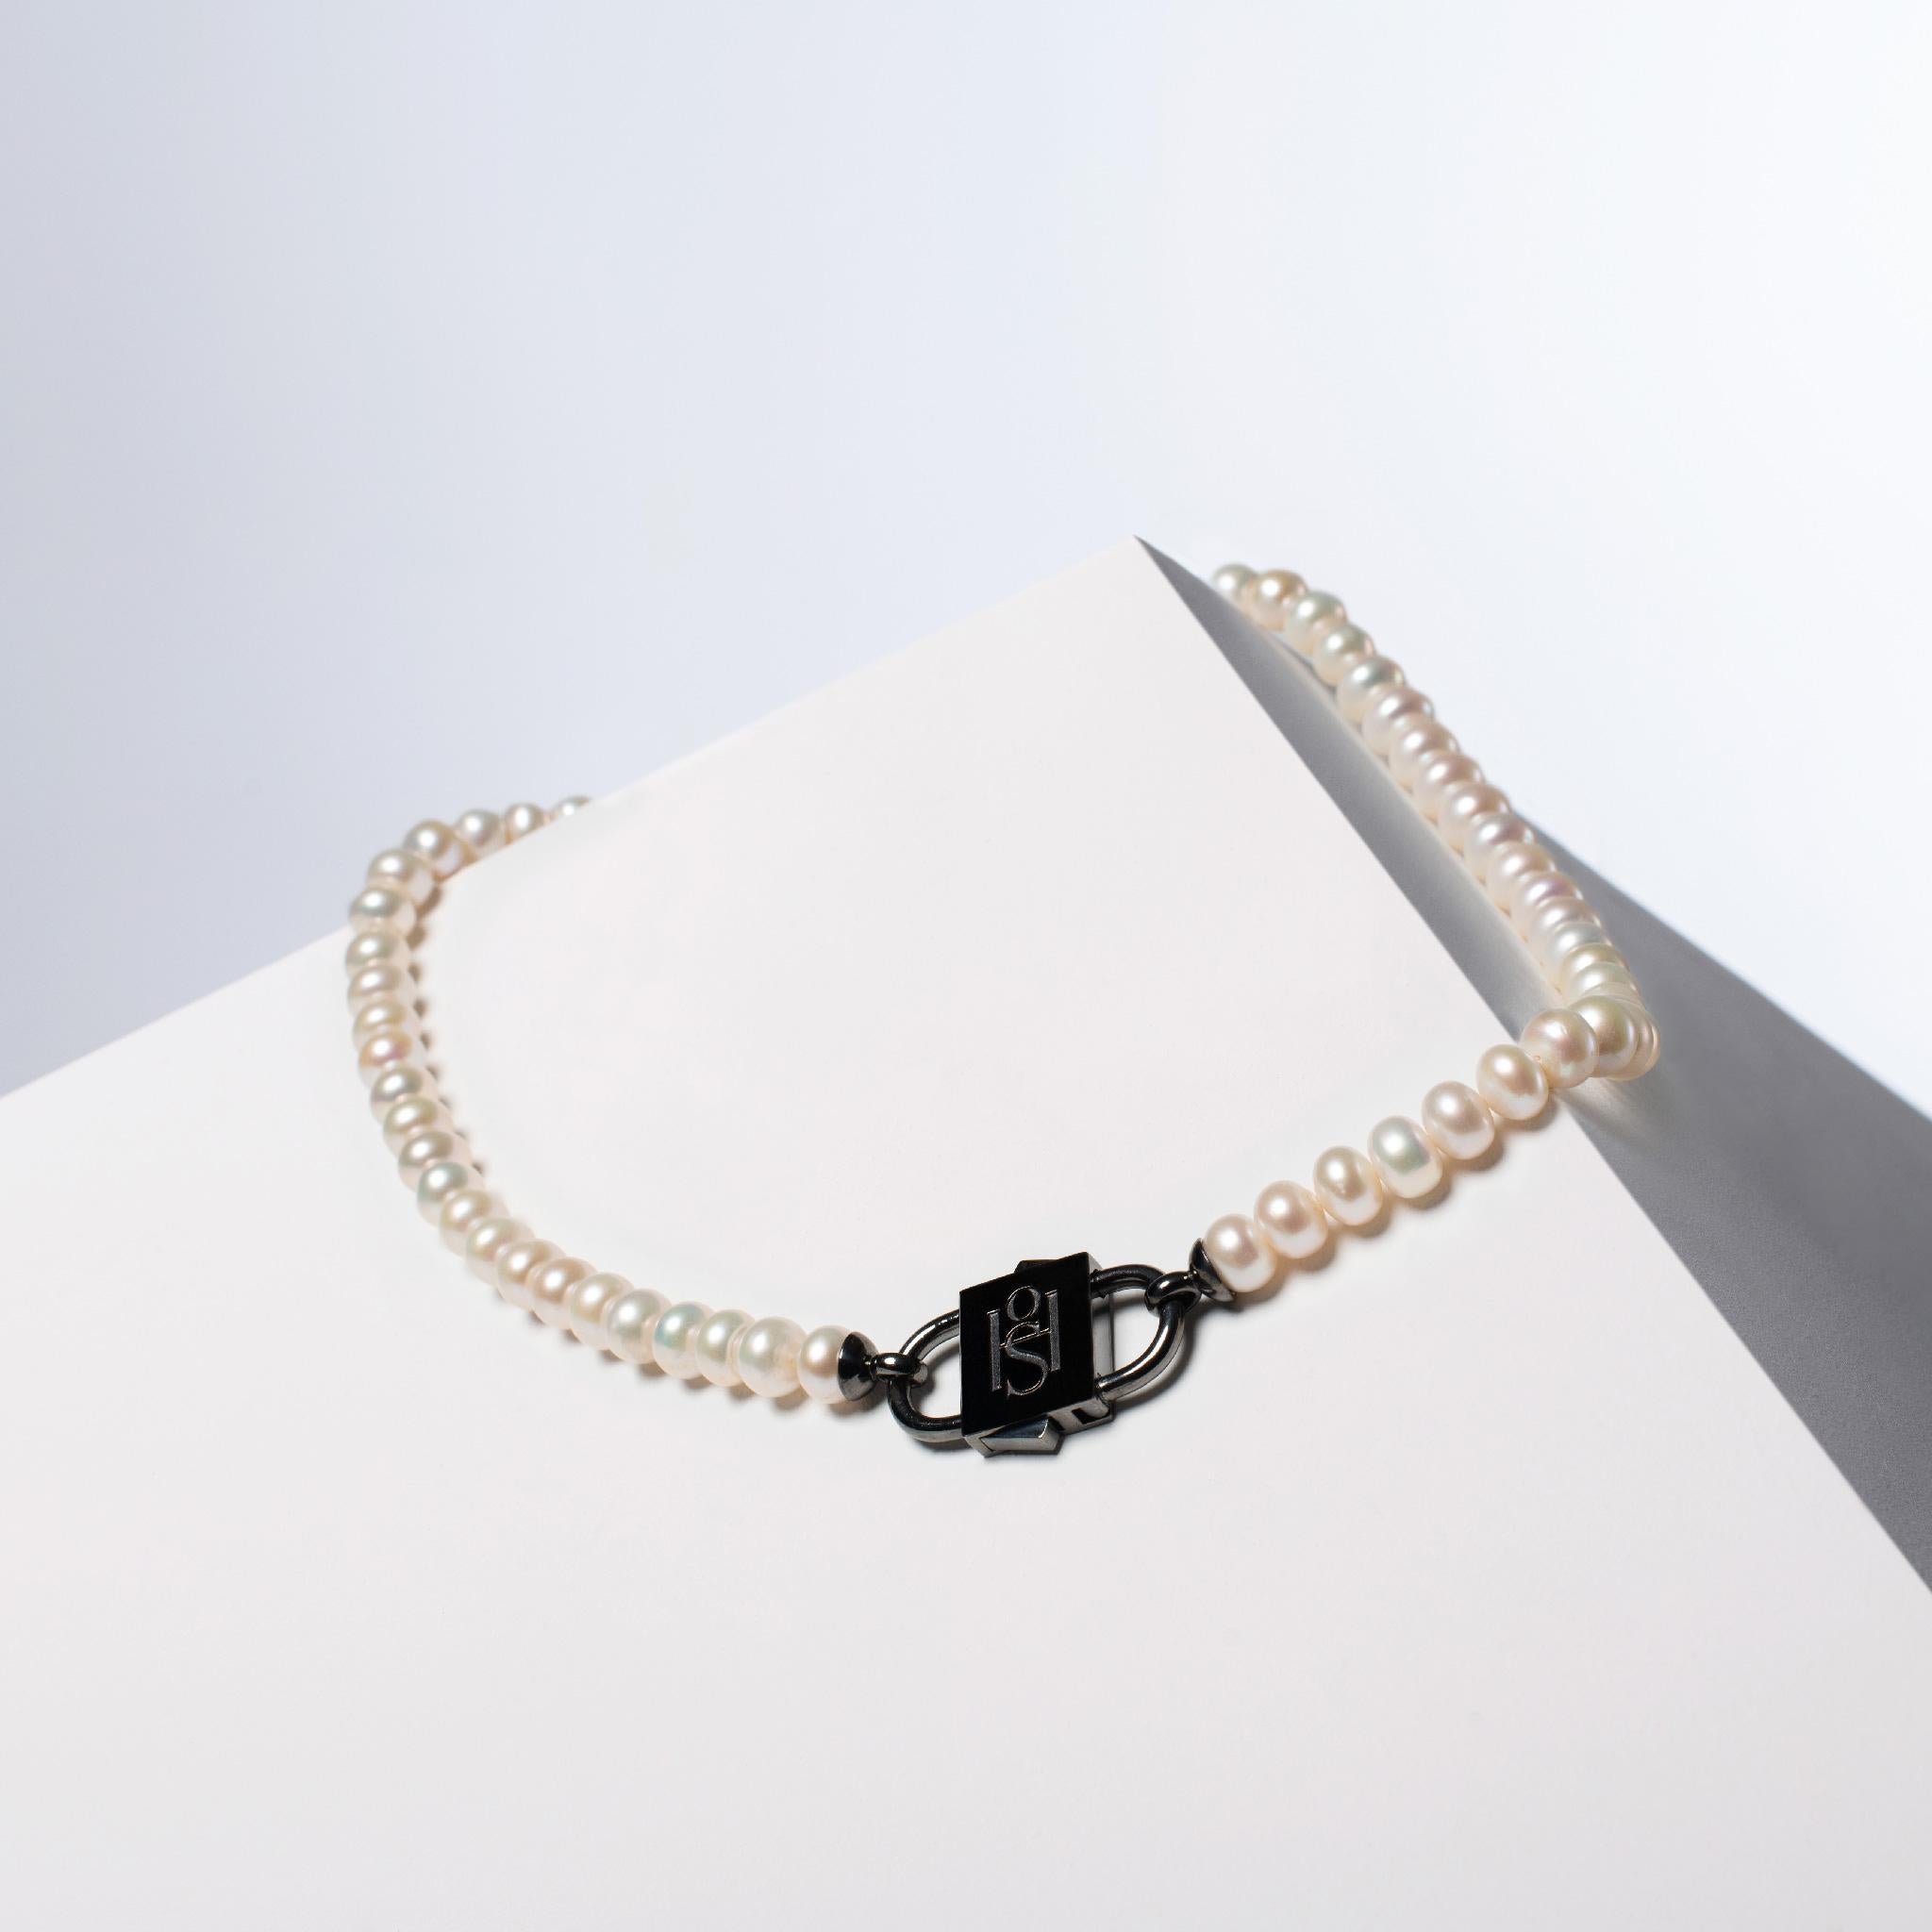 - Natural, high-luster white button pearl necklace with 1 micron Black rhodium filled 925 sterling silver HoS Lock™
- The Pearl Necklace measures 42.5 cm (16.7 inches) in length, offering an ideal size that gracefully adorns the neckline.
-